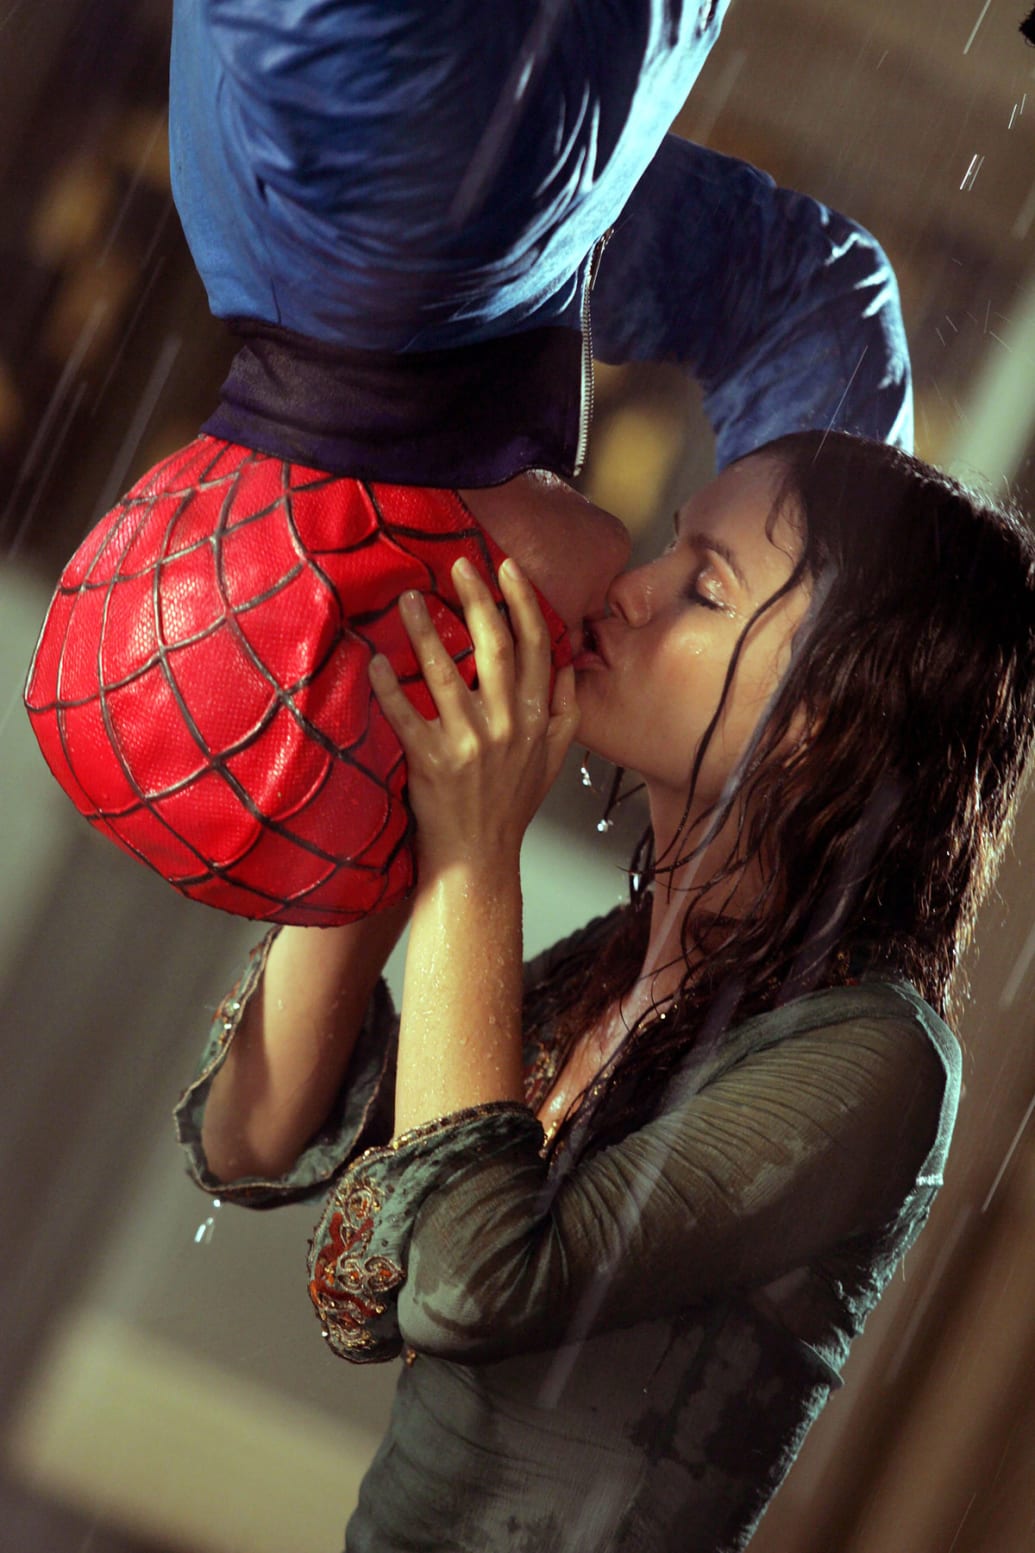 A picture of Adam Brody and Rachel Bilson in ‘The O.C.' doing the upside down Spider-Man kiss in the rain